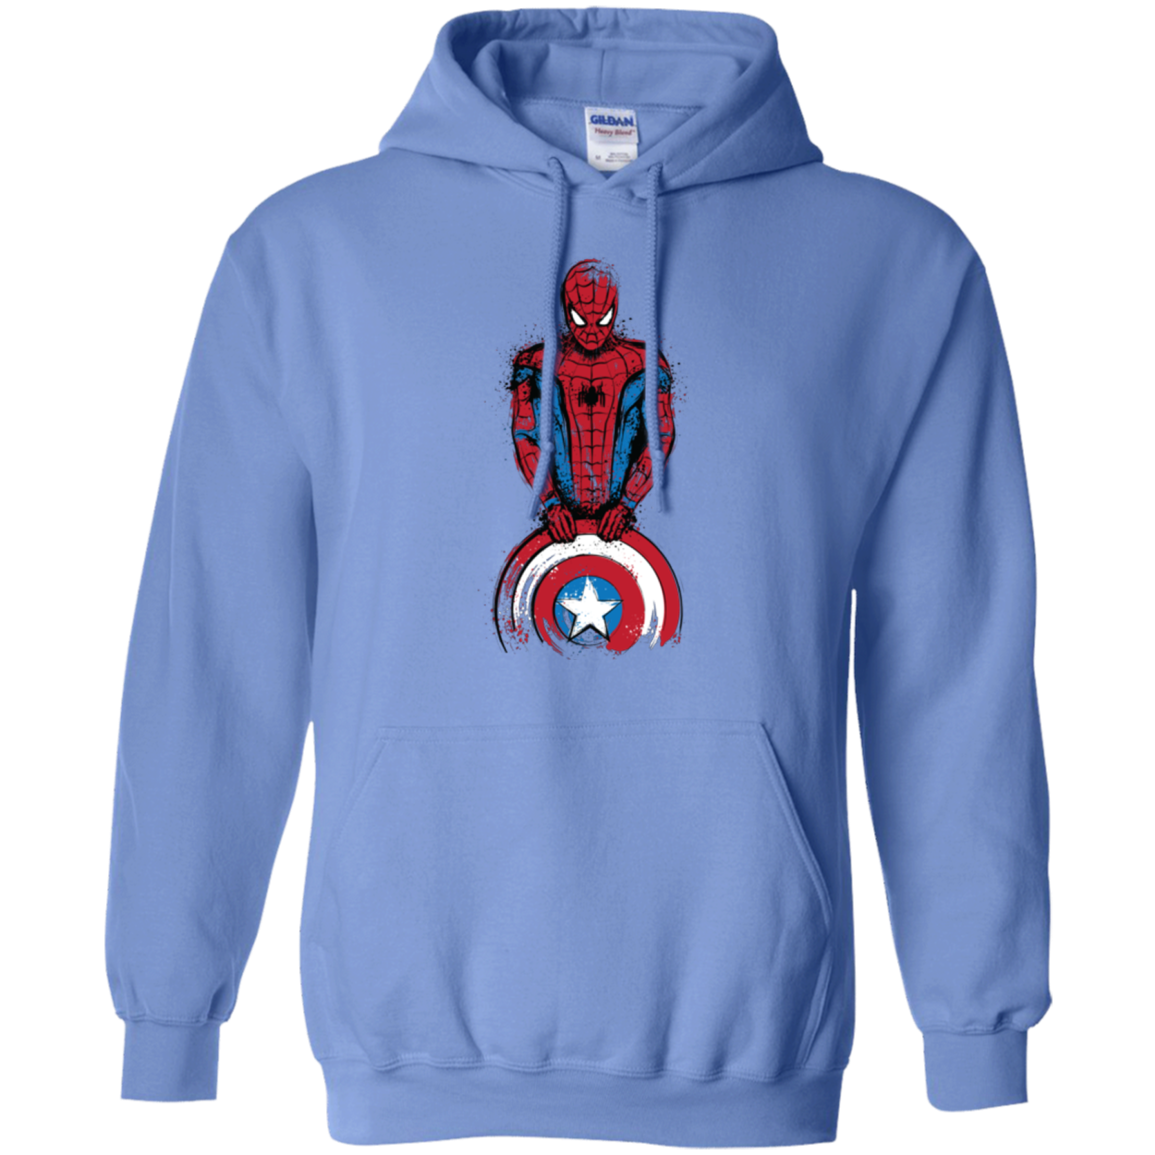 The Spider is Coming Pullover Hoodie